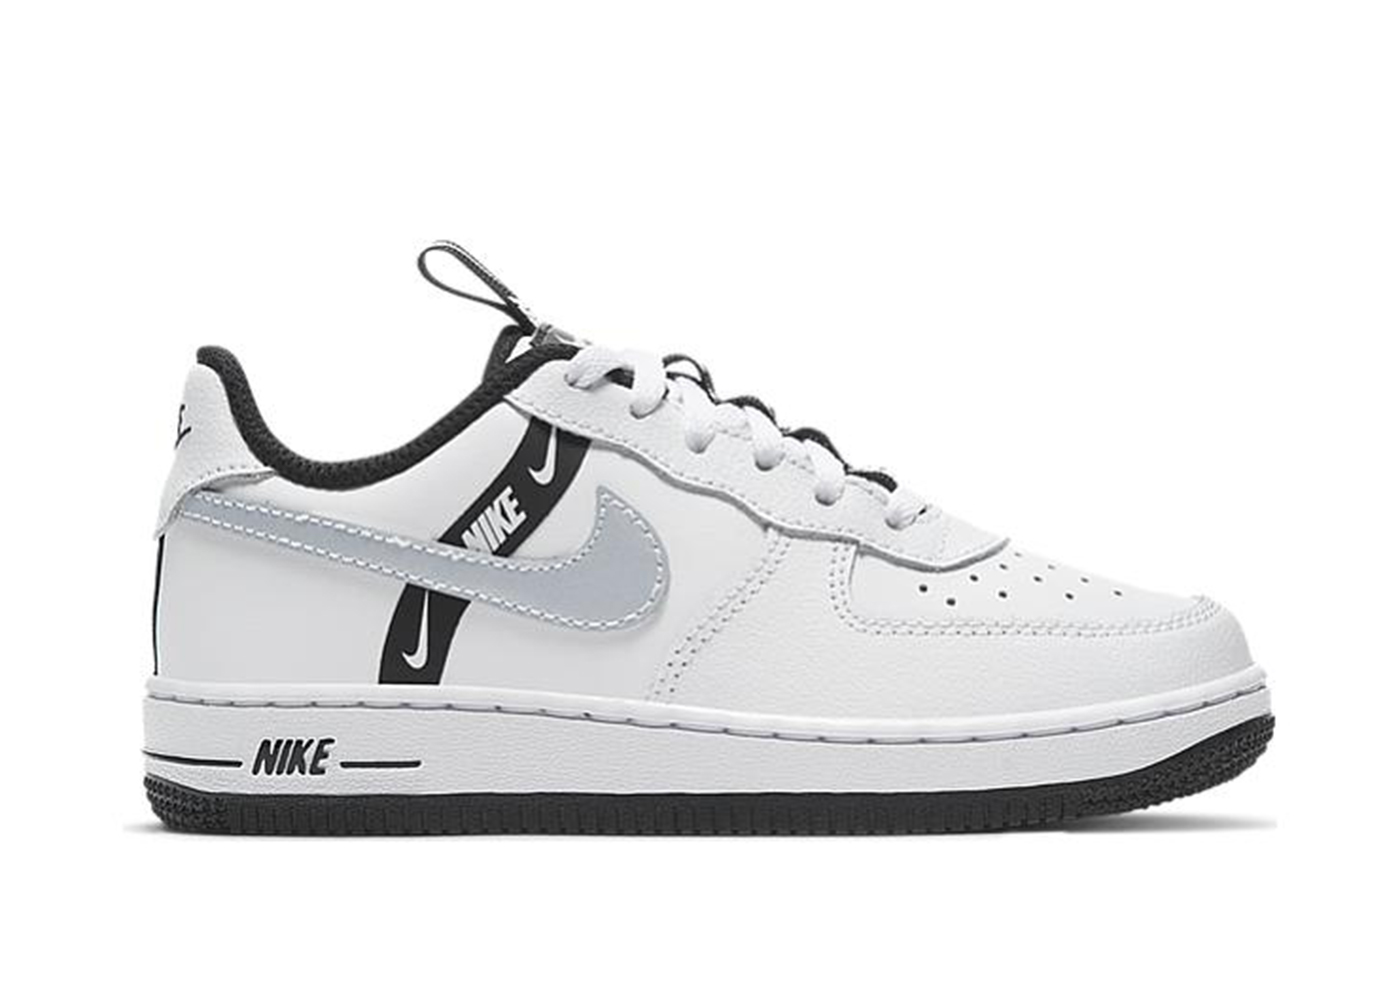 Nike Air Force 1 LV8 KSA Worldwide Pack White Reflect Silver (PS 